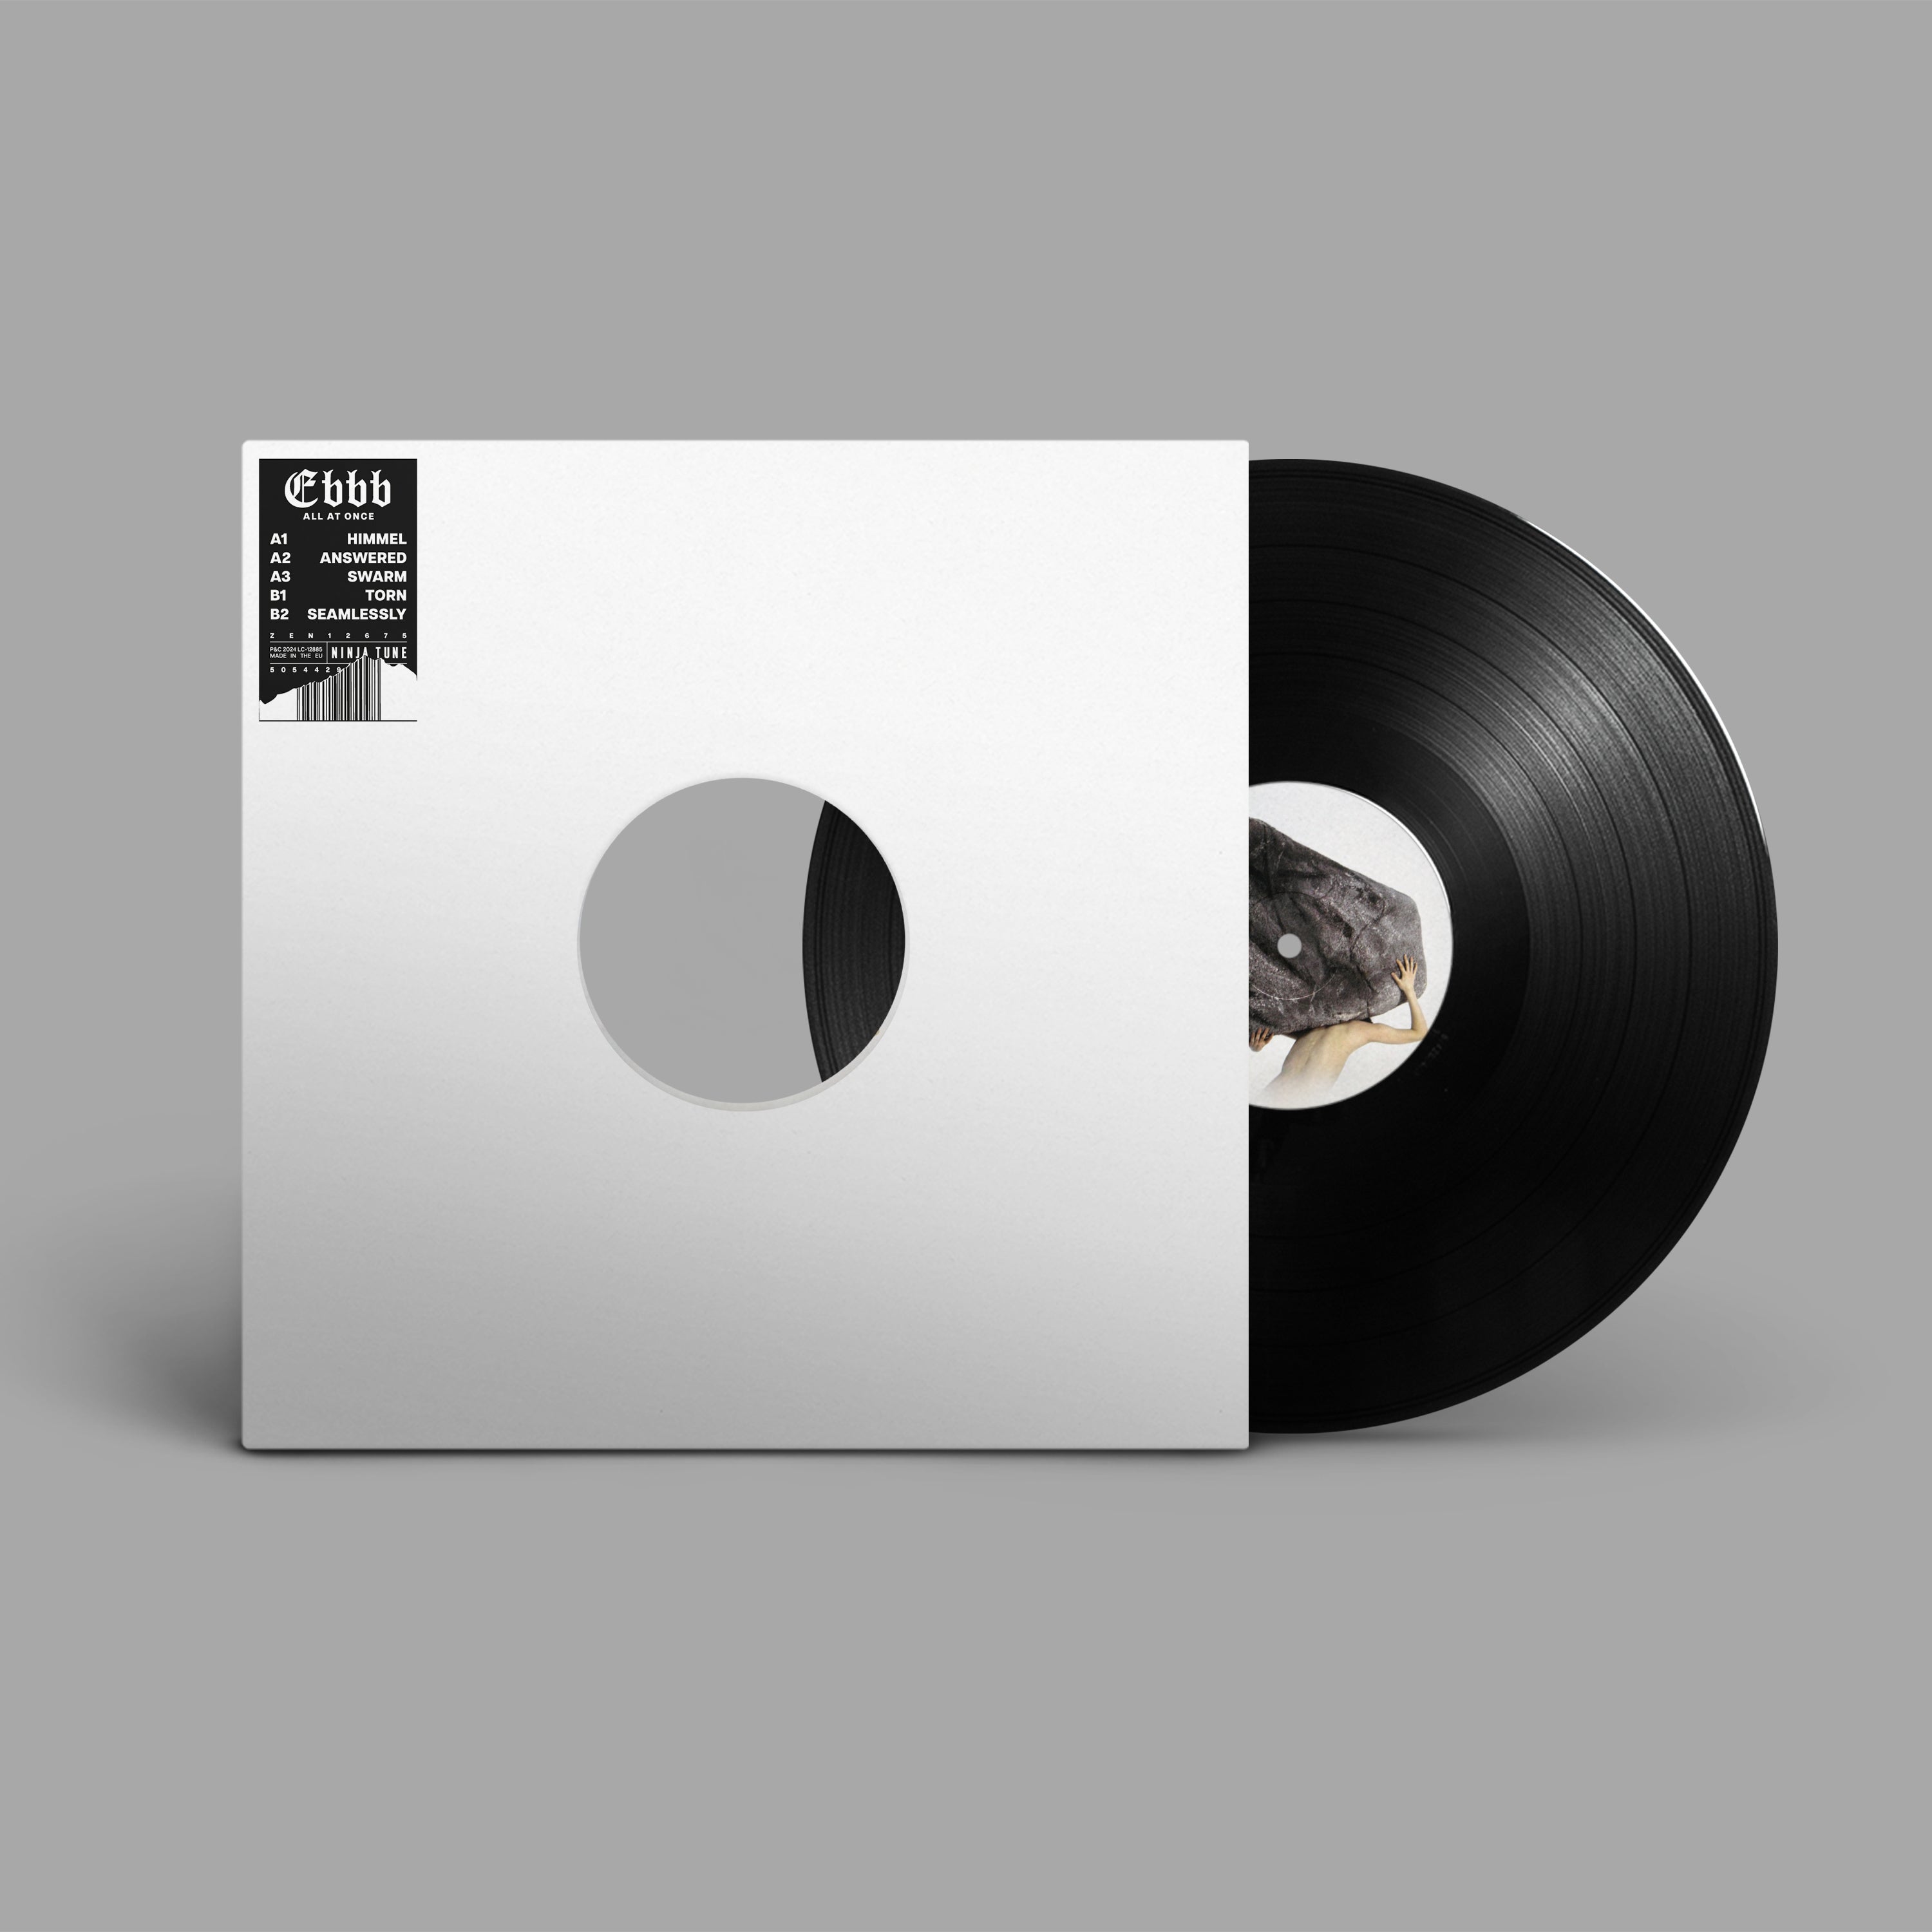 Ebbb - All At Once: Vinyl 12" EP